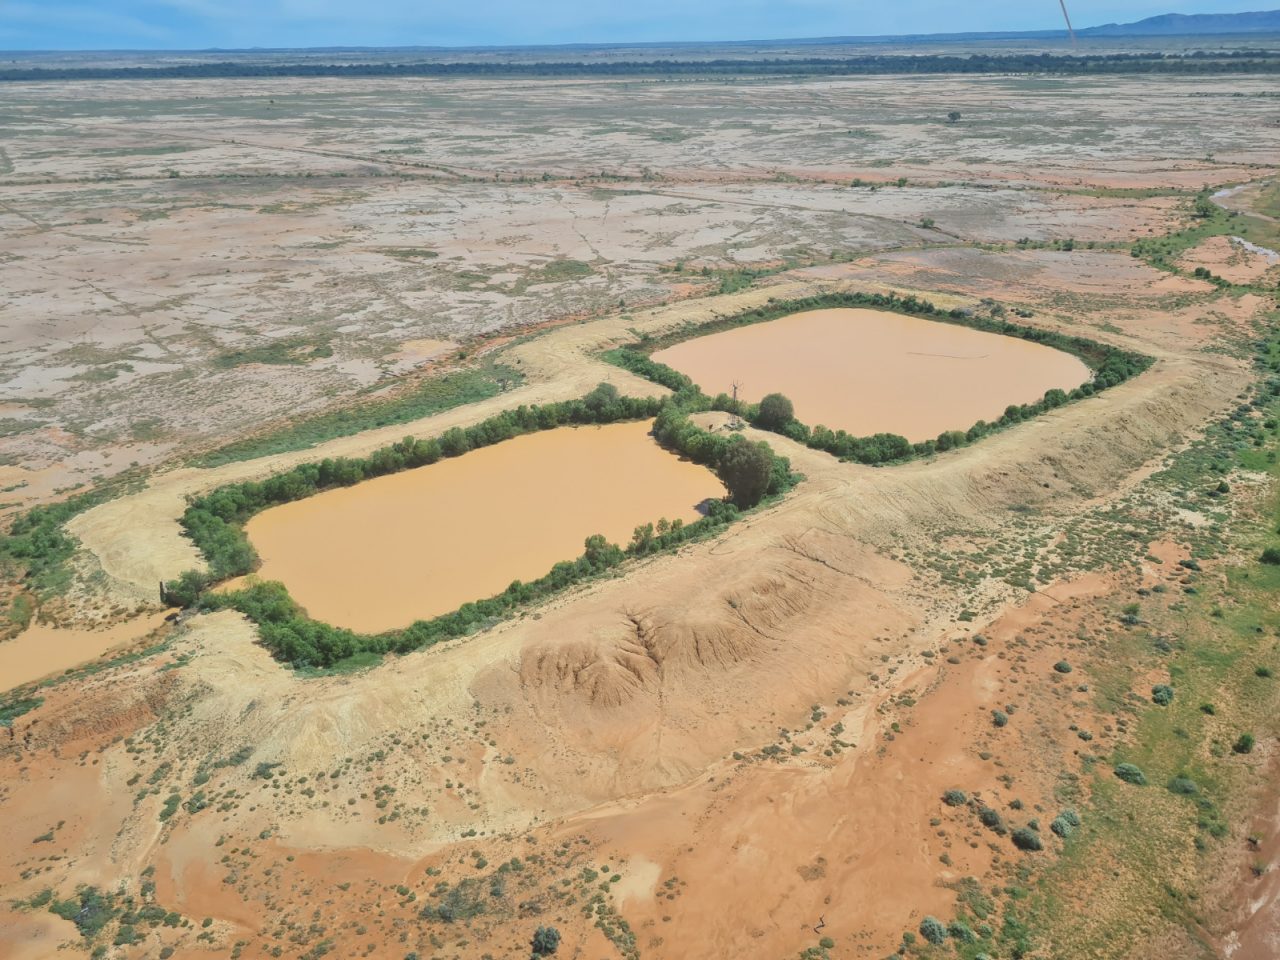 Aerial photo of two small rectangle farm dams holding orange-brown water in a desert landscape . Trees  and vegetation are growing in  thin line along the edge op the dams.  